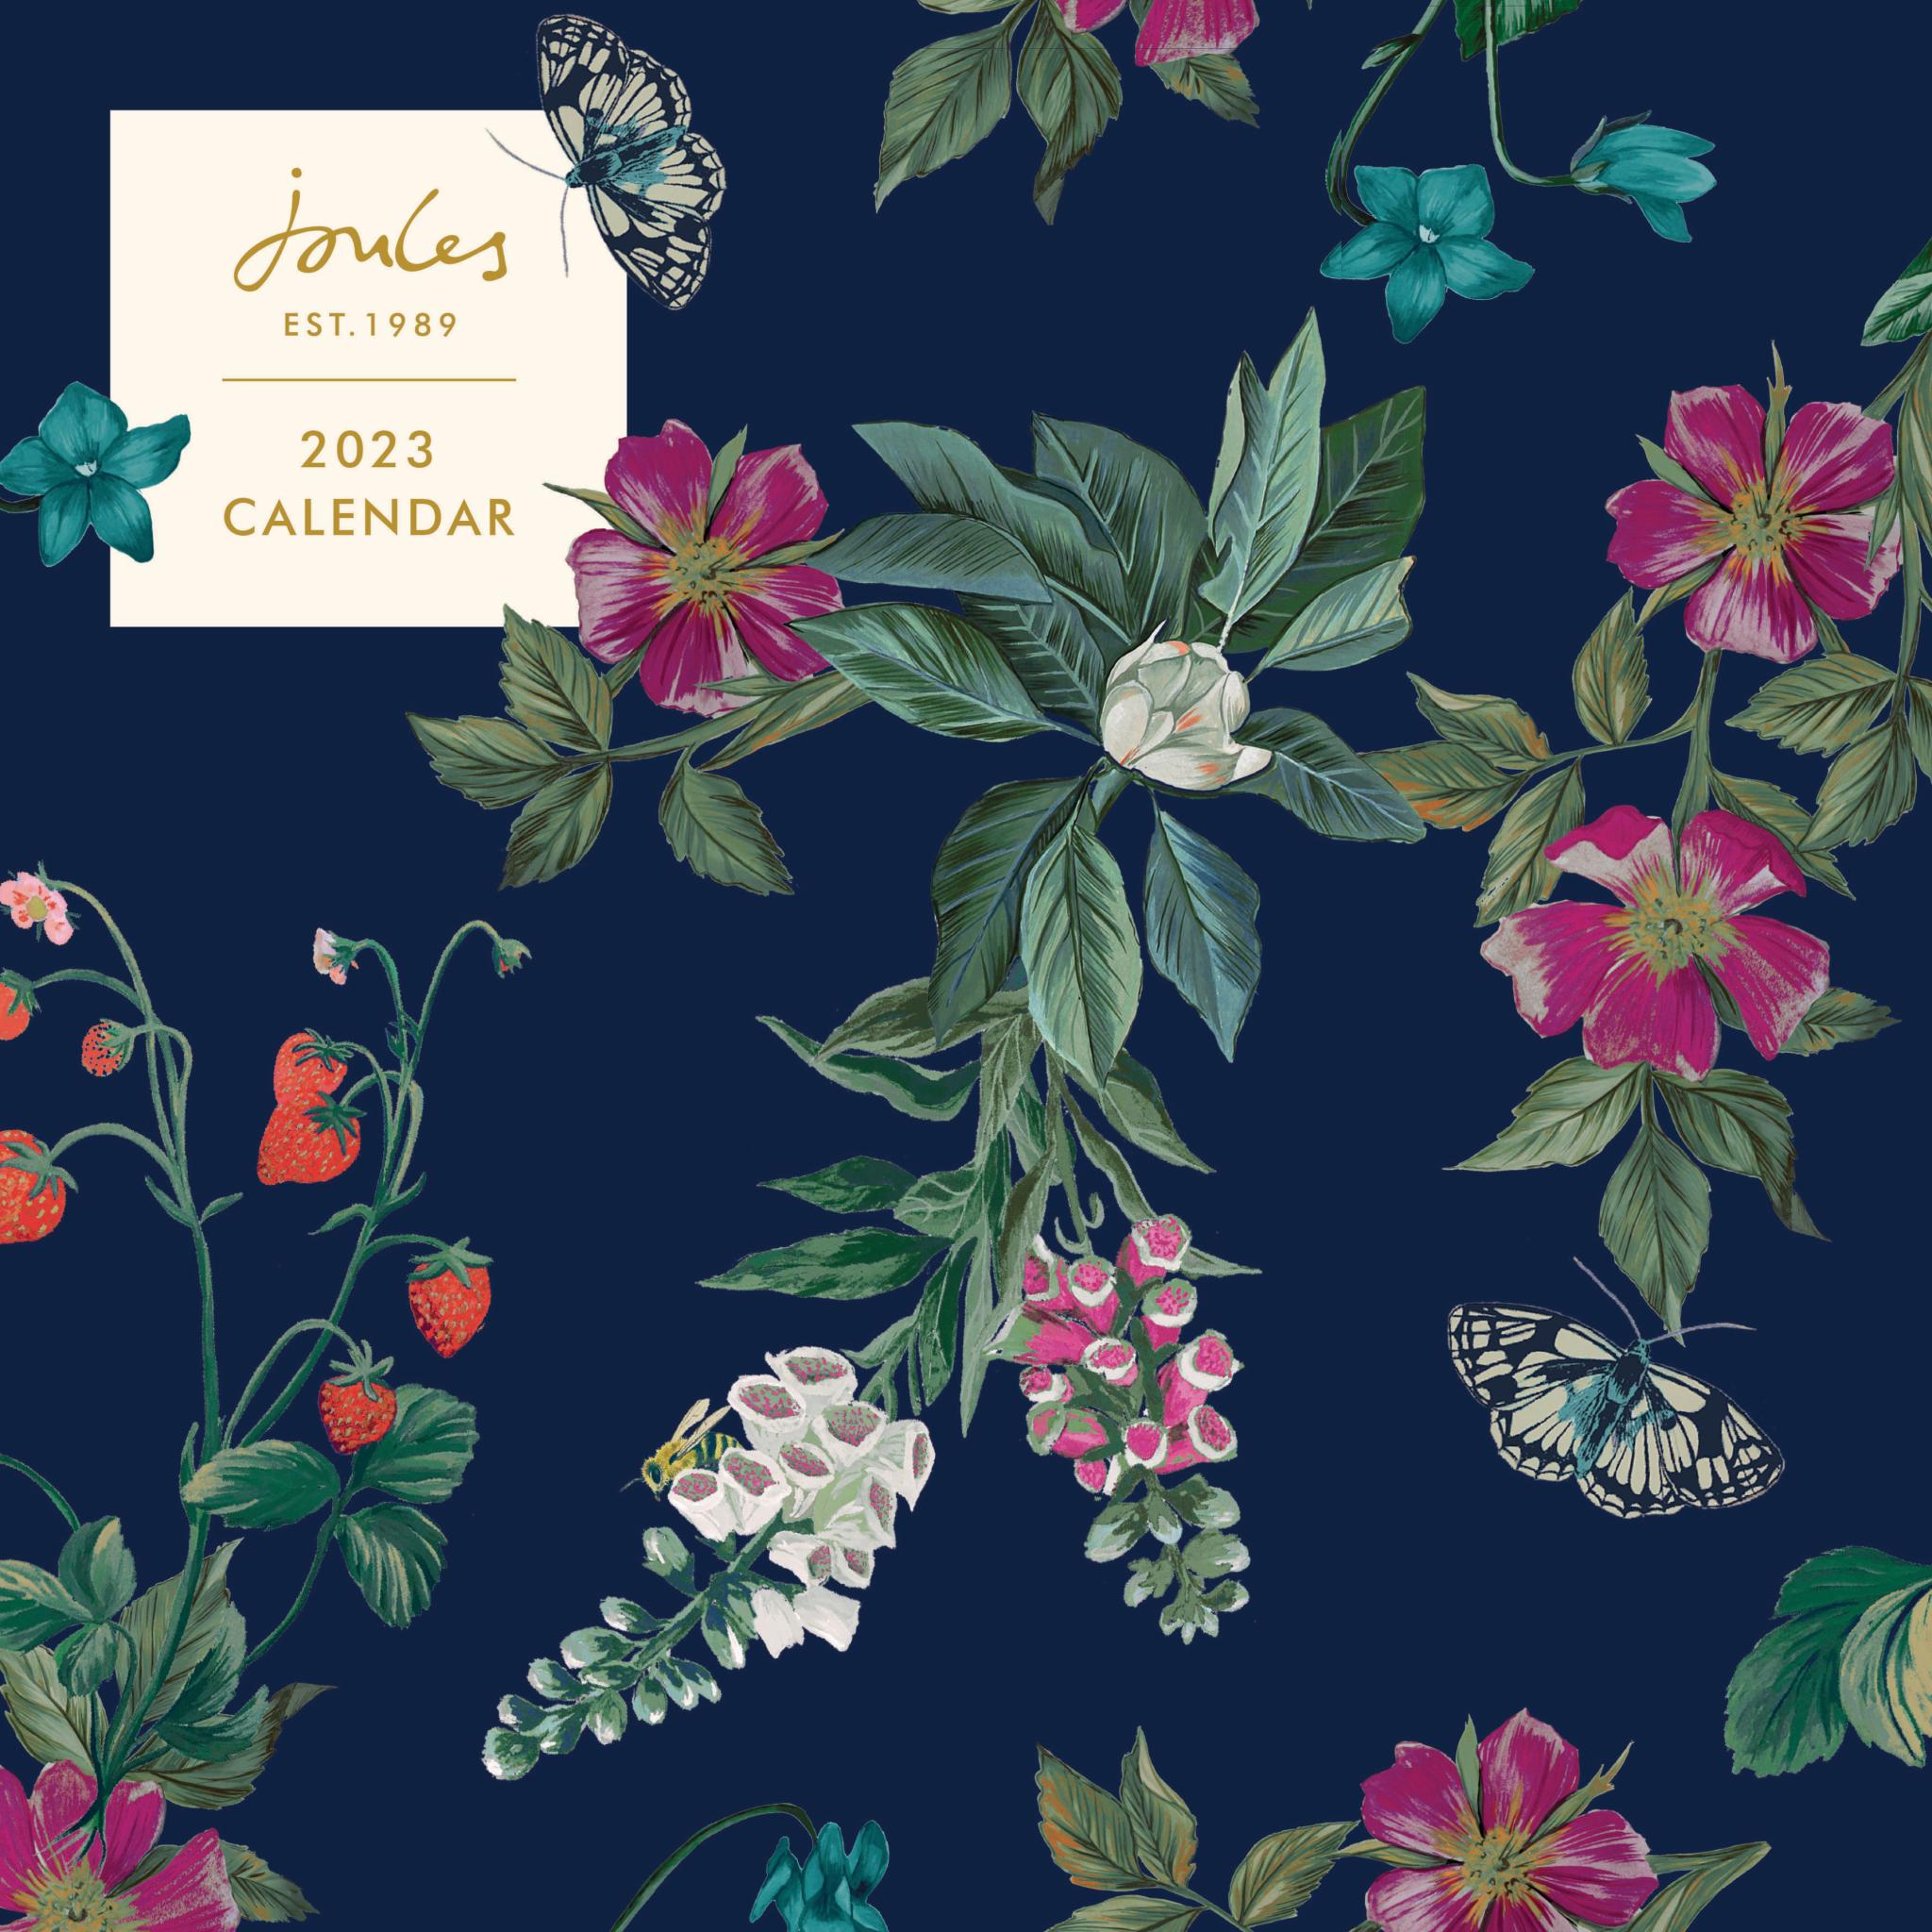 Joules Floral Wall Calendar 2023